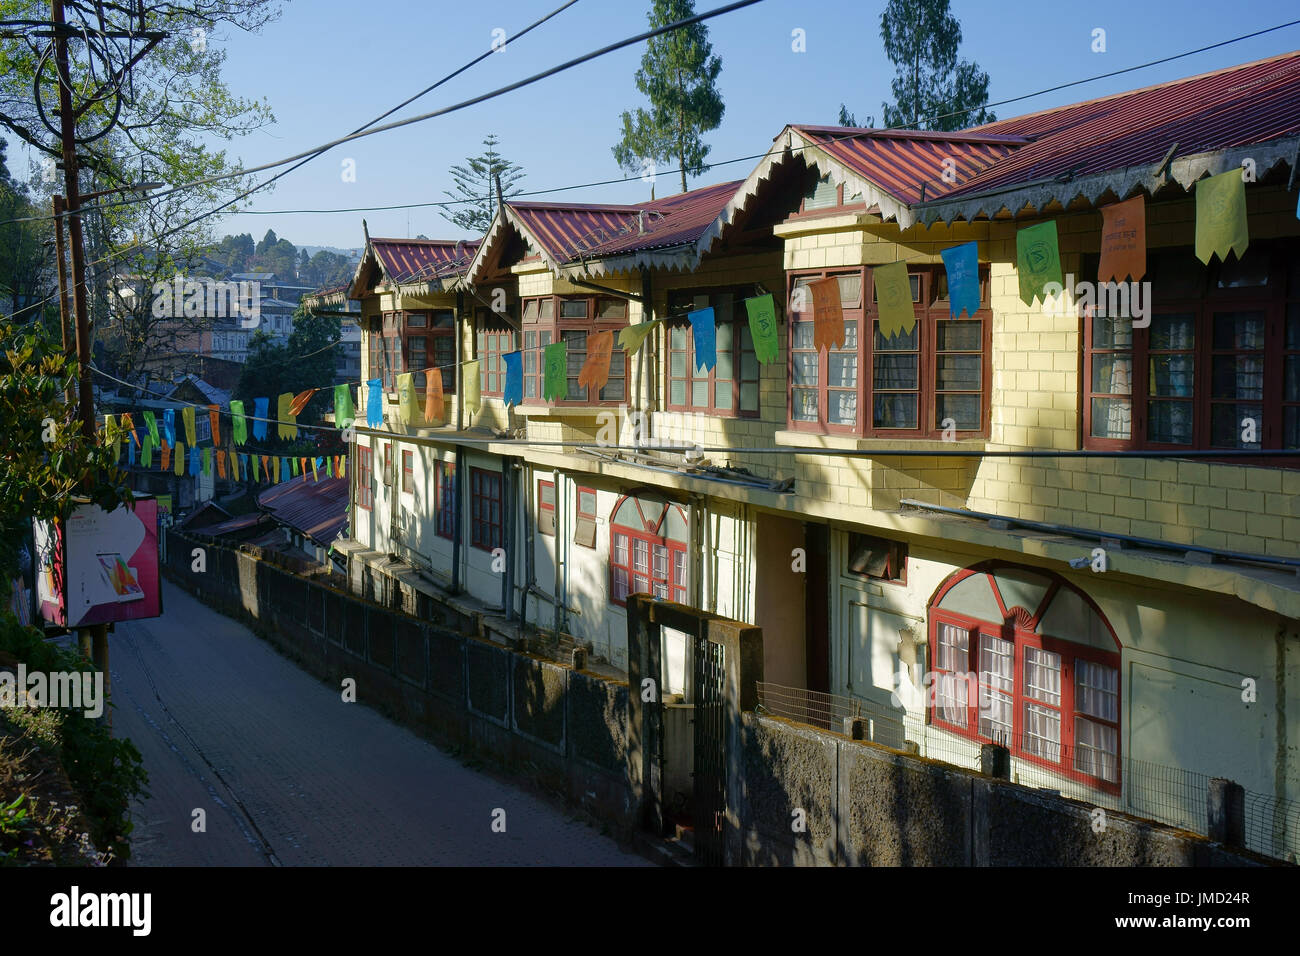 Row of houses along 'The Mall' on Observatory hill, Darjeeling, WEest Bengal, India Stock Photo